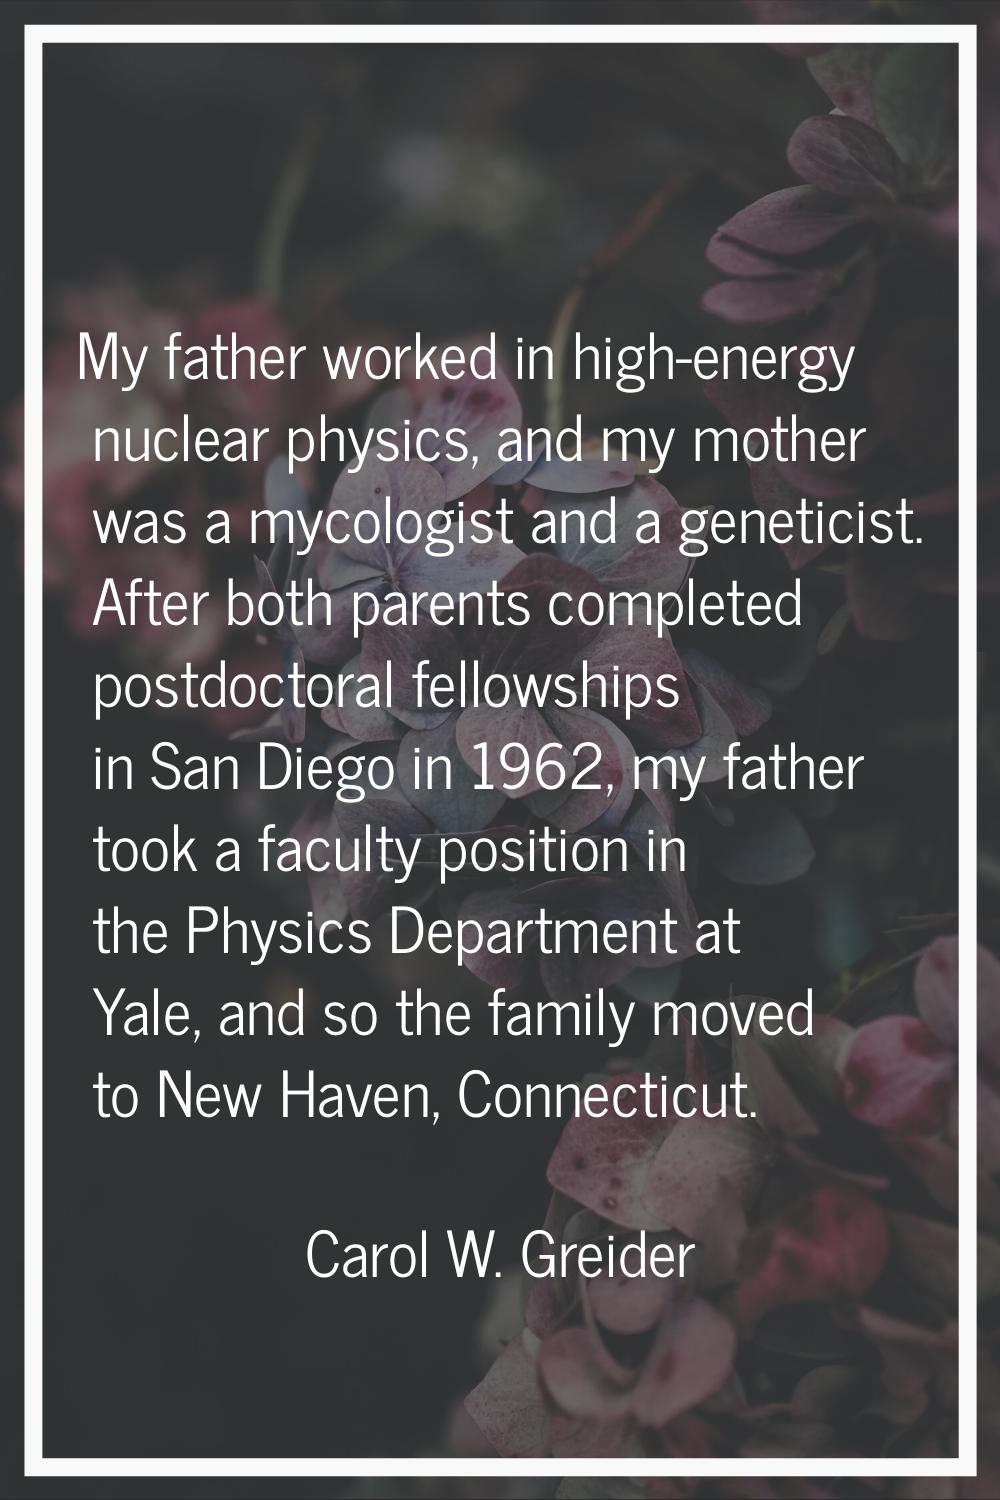 My father worked in high-energy nuclear physics, and my mother was a mycologist and a geneticist. A